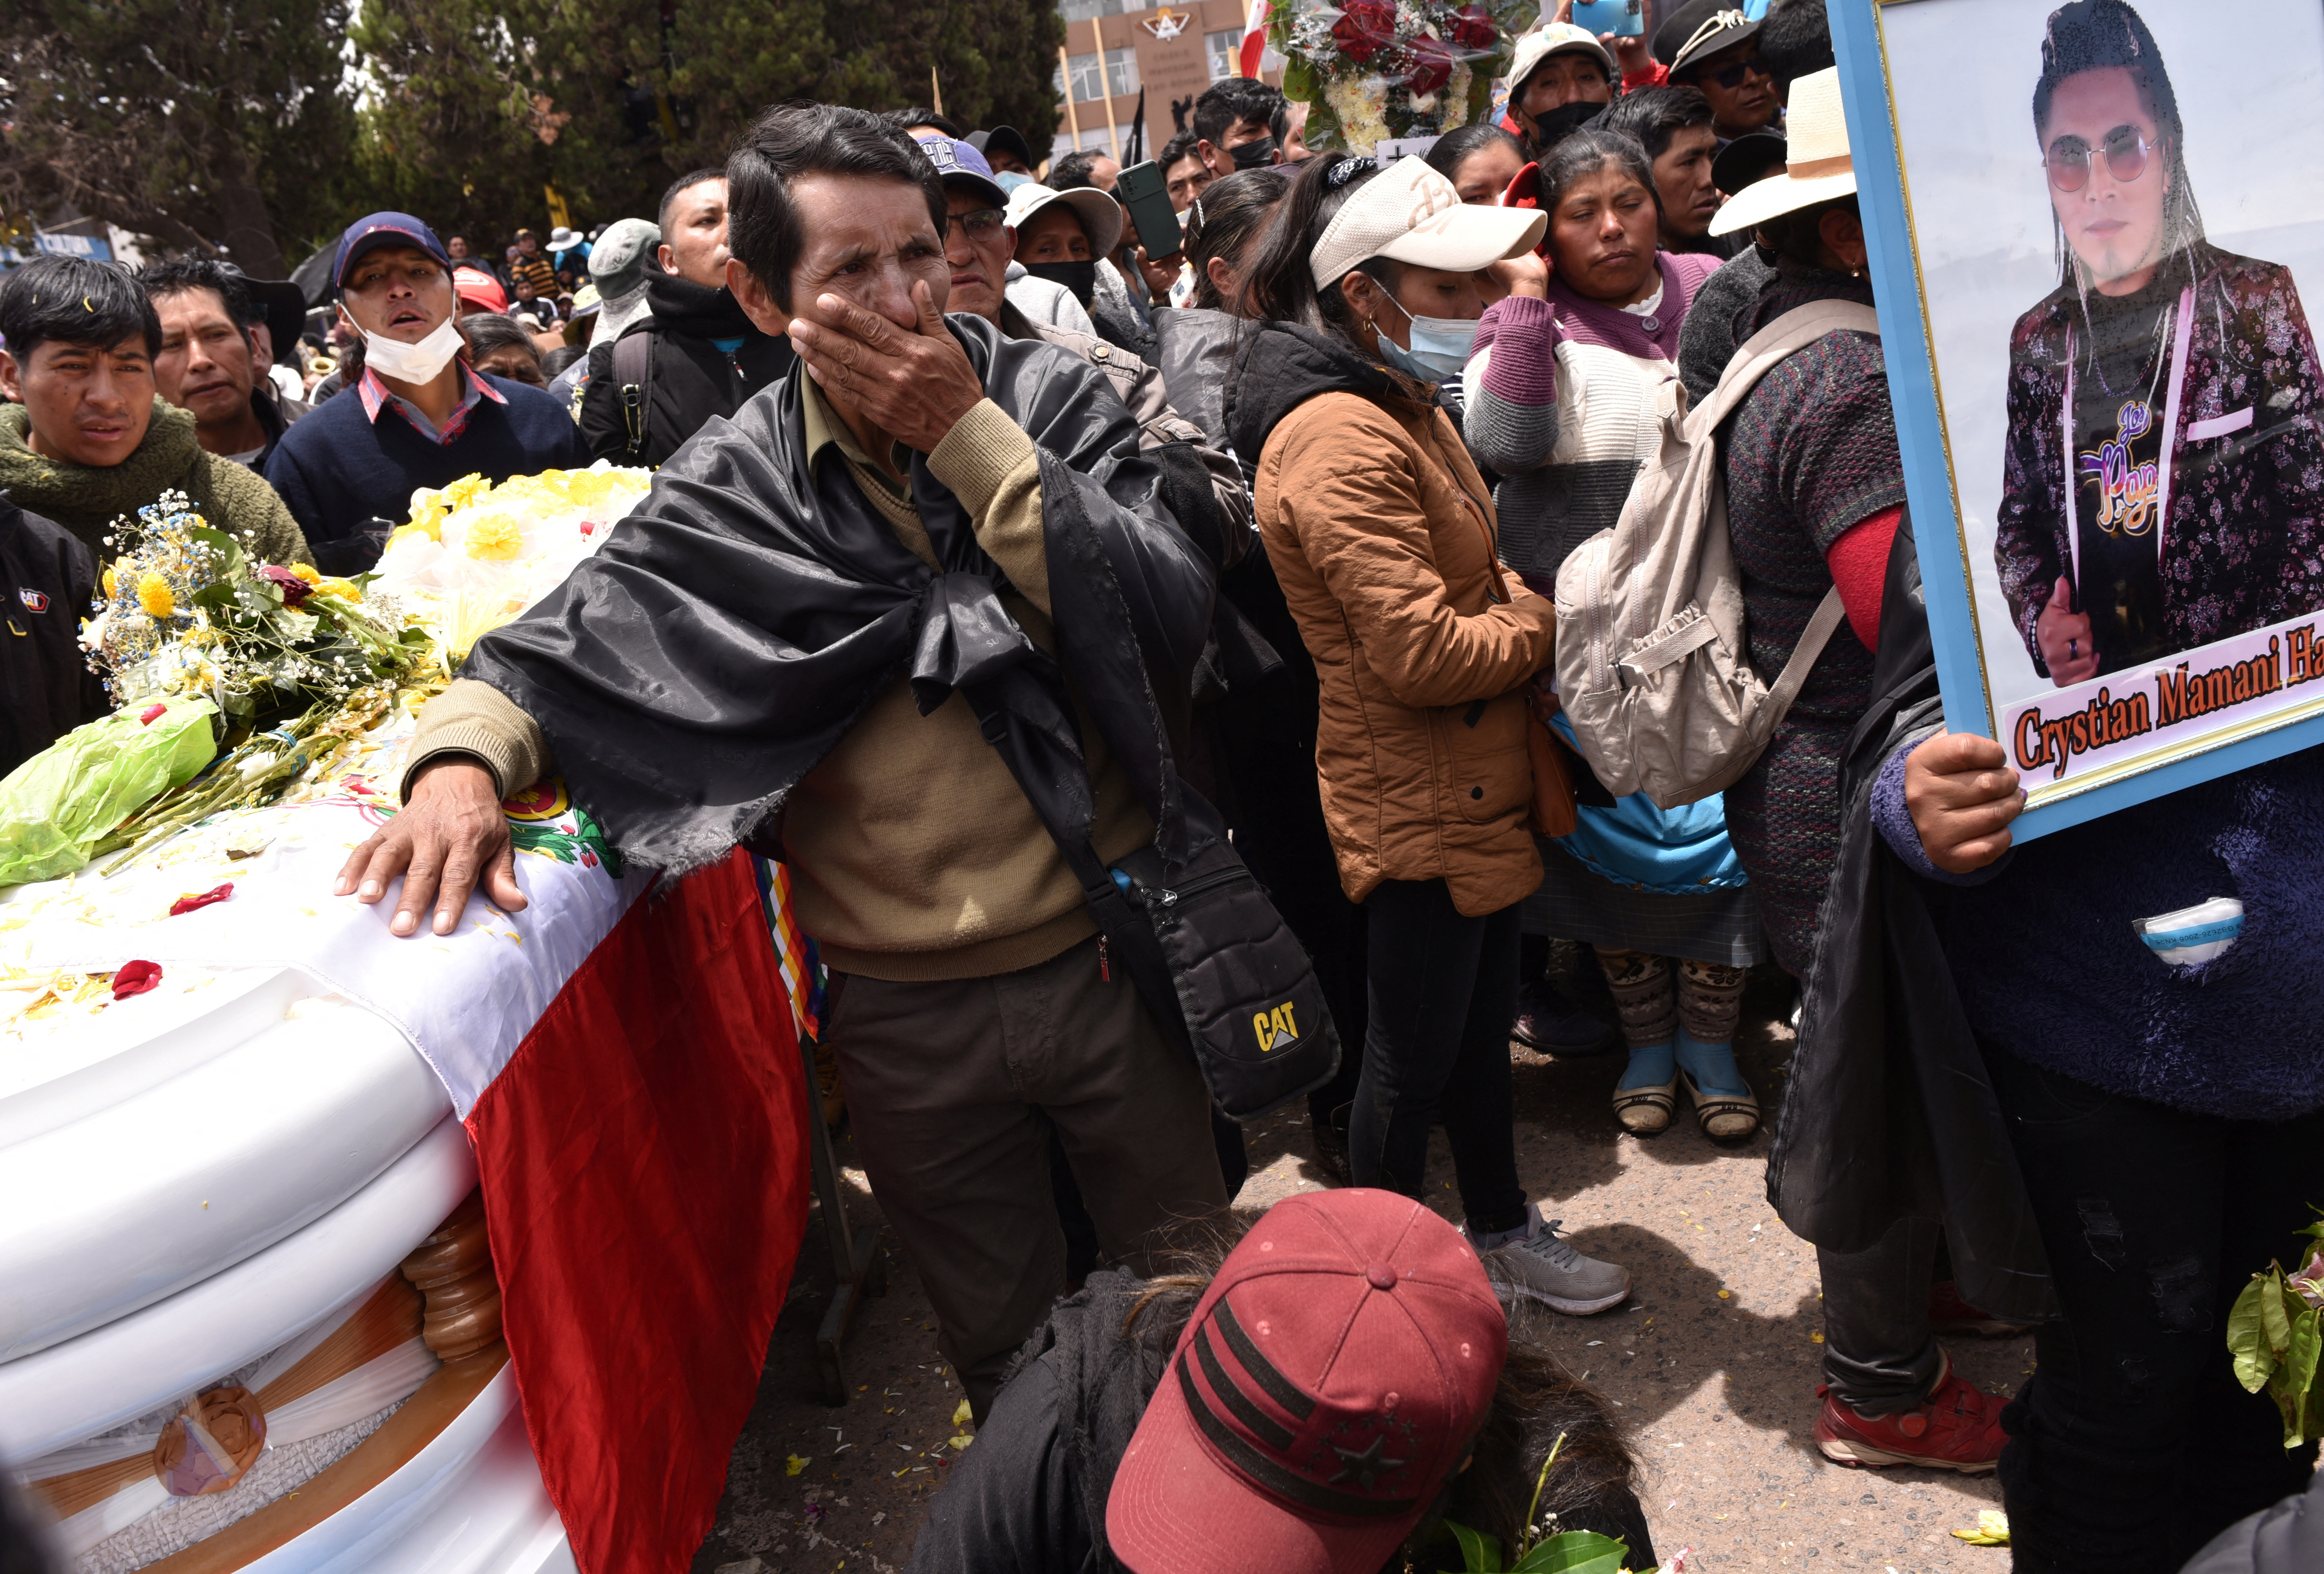 Peru families mourn the death of protest victims in Juliaca